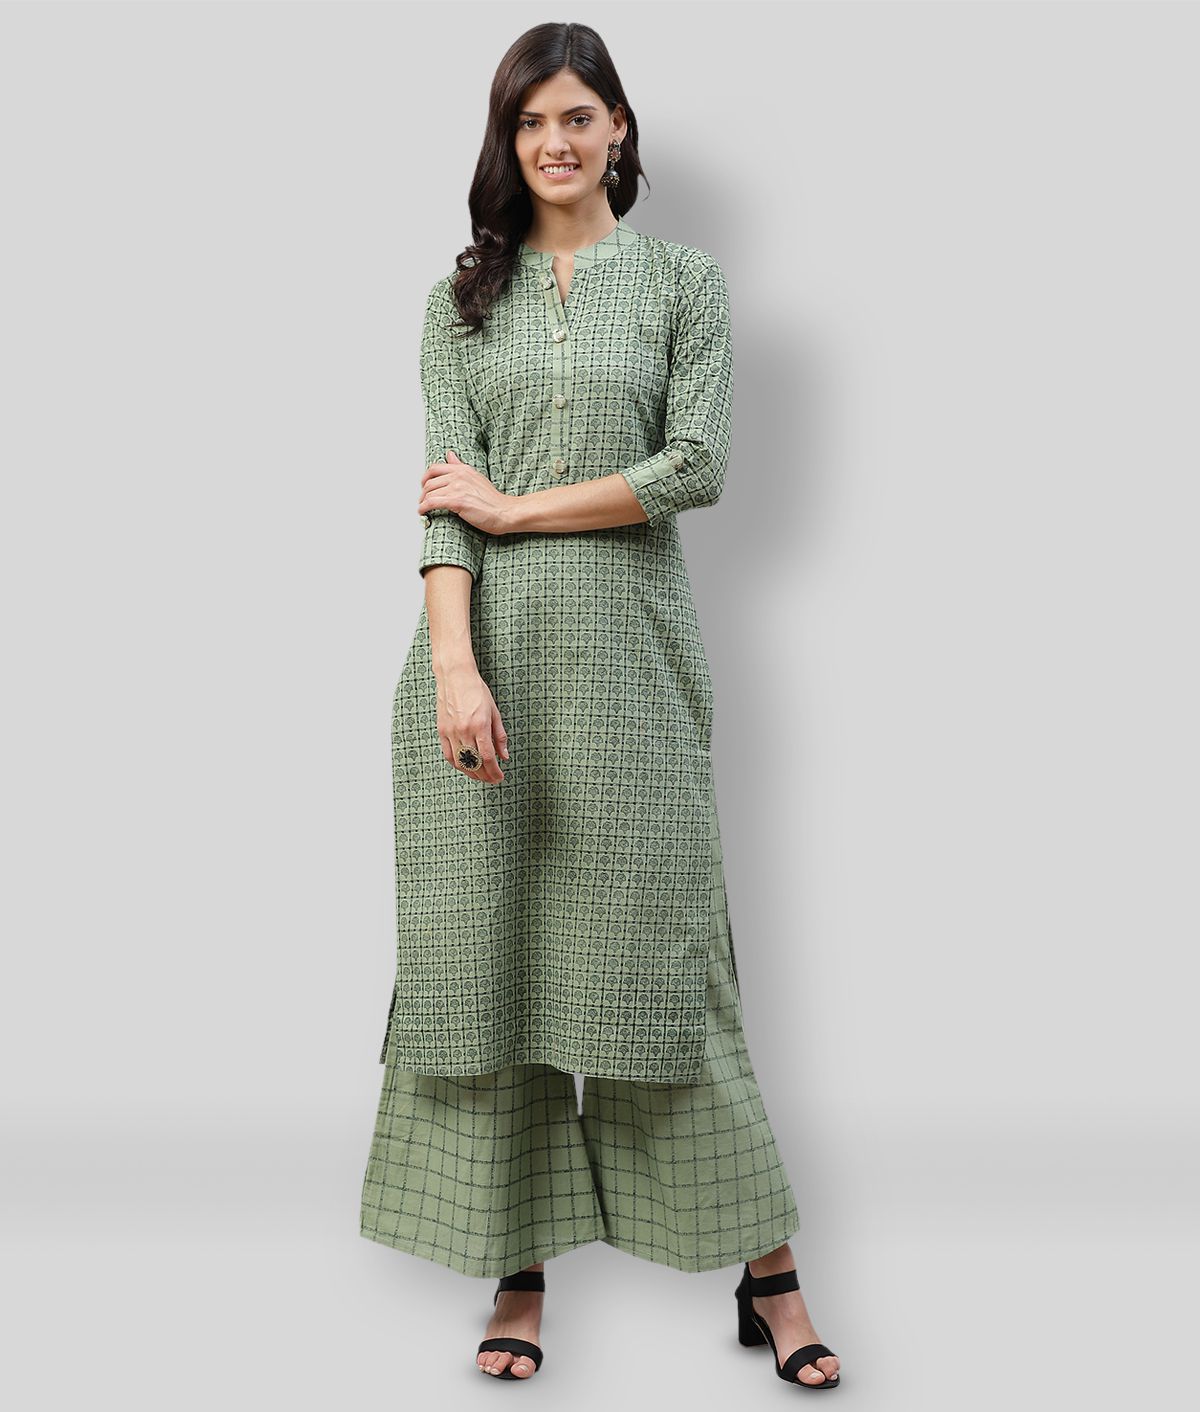     			JC4U - Olive Straight Cotton Women's Stitched Salwar Suit ( Pack of 1 )